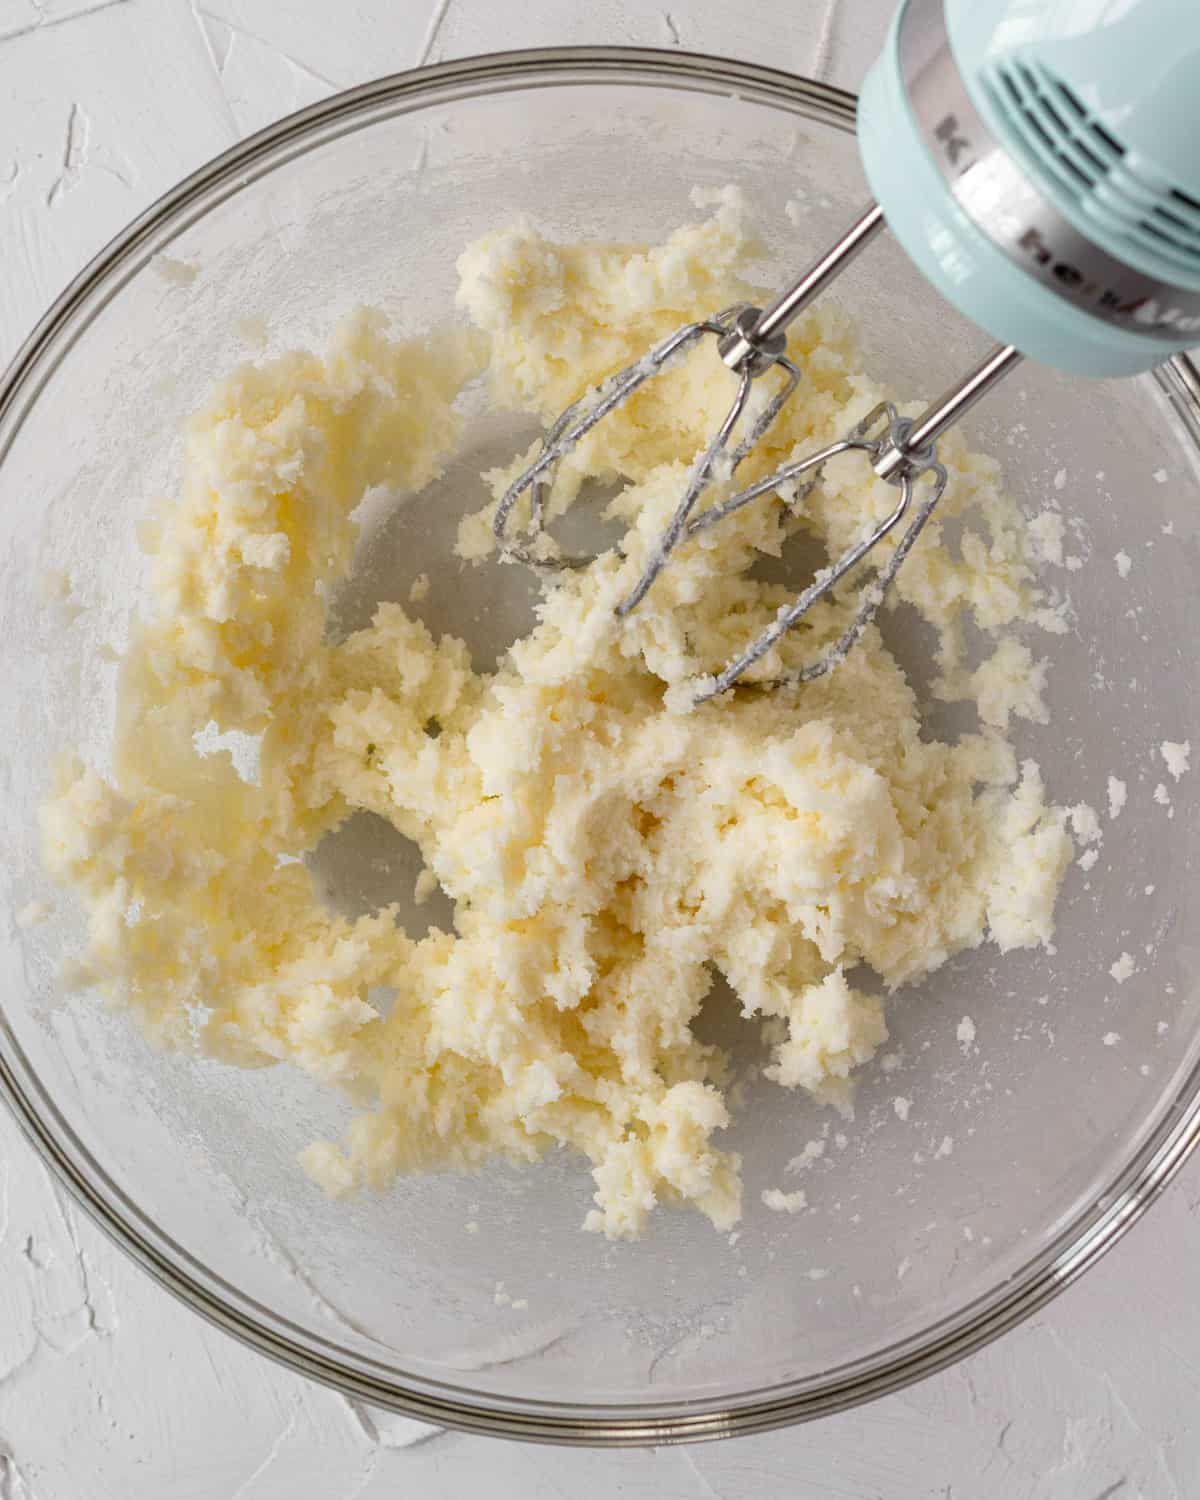 clear glass bowl with butter and sugar mixed together by an electric mixer